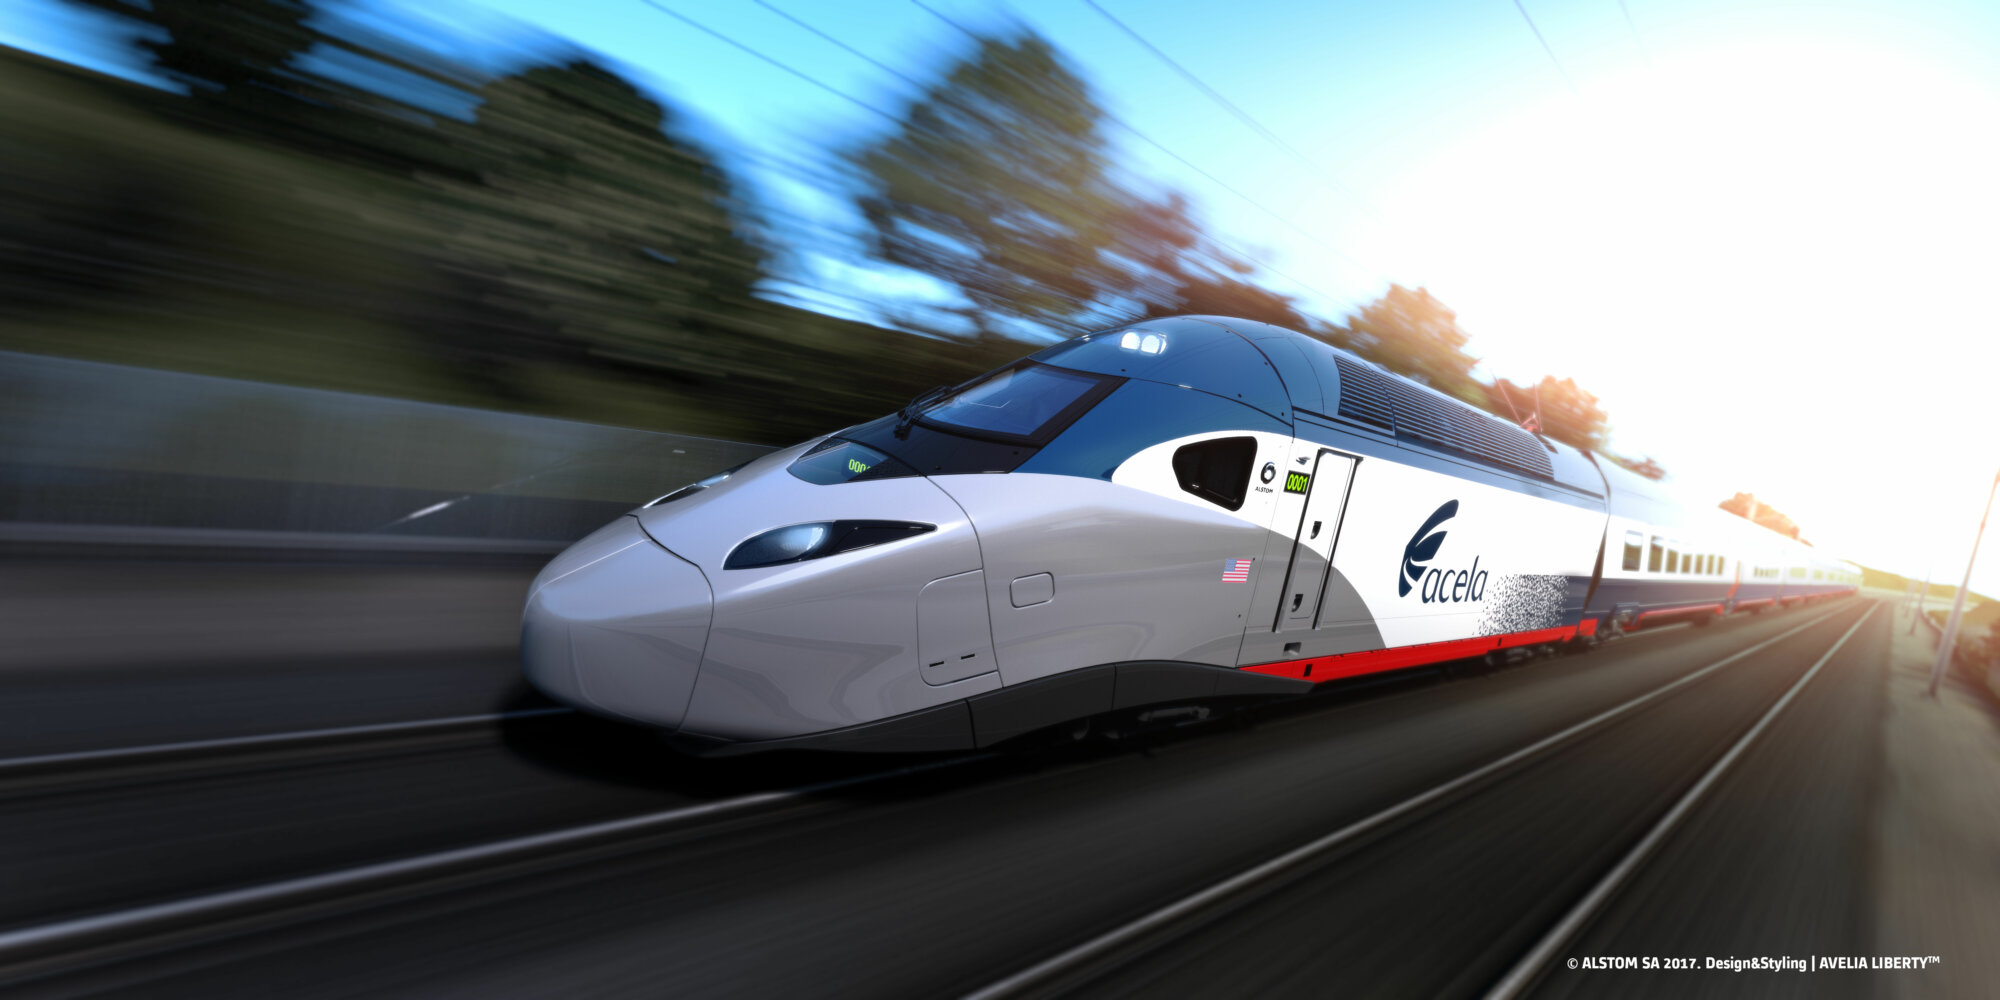 Amtrak audit: New Acela trains likely to be delayed